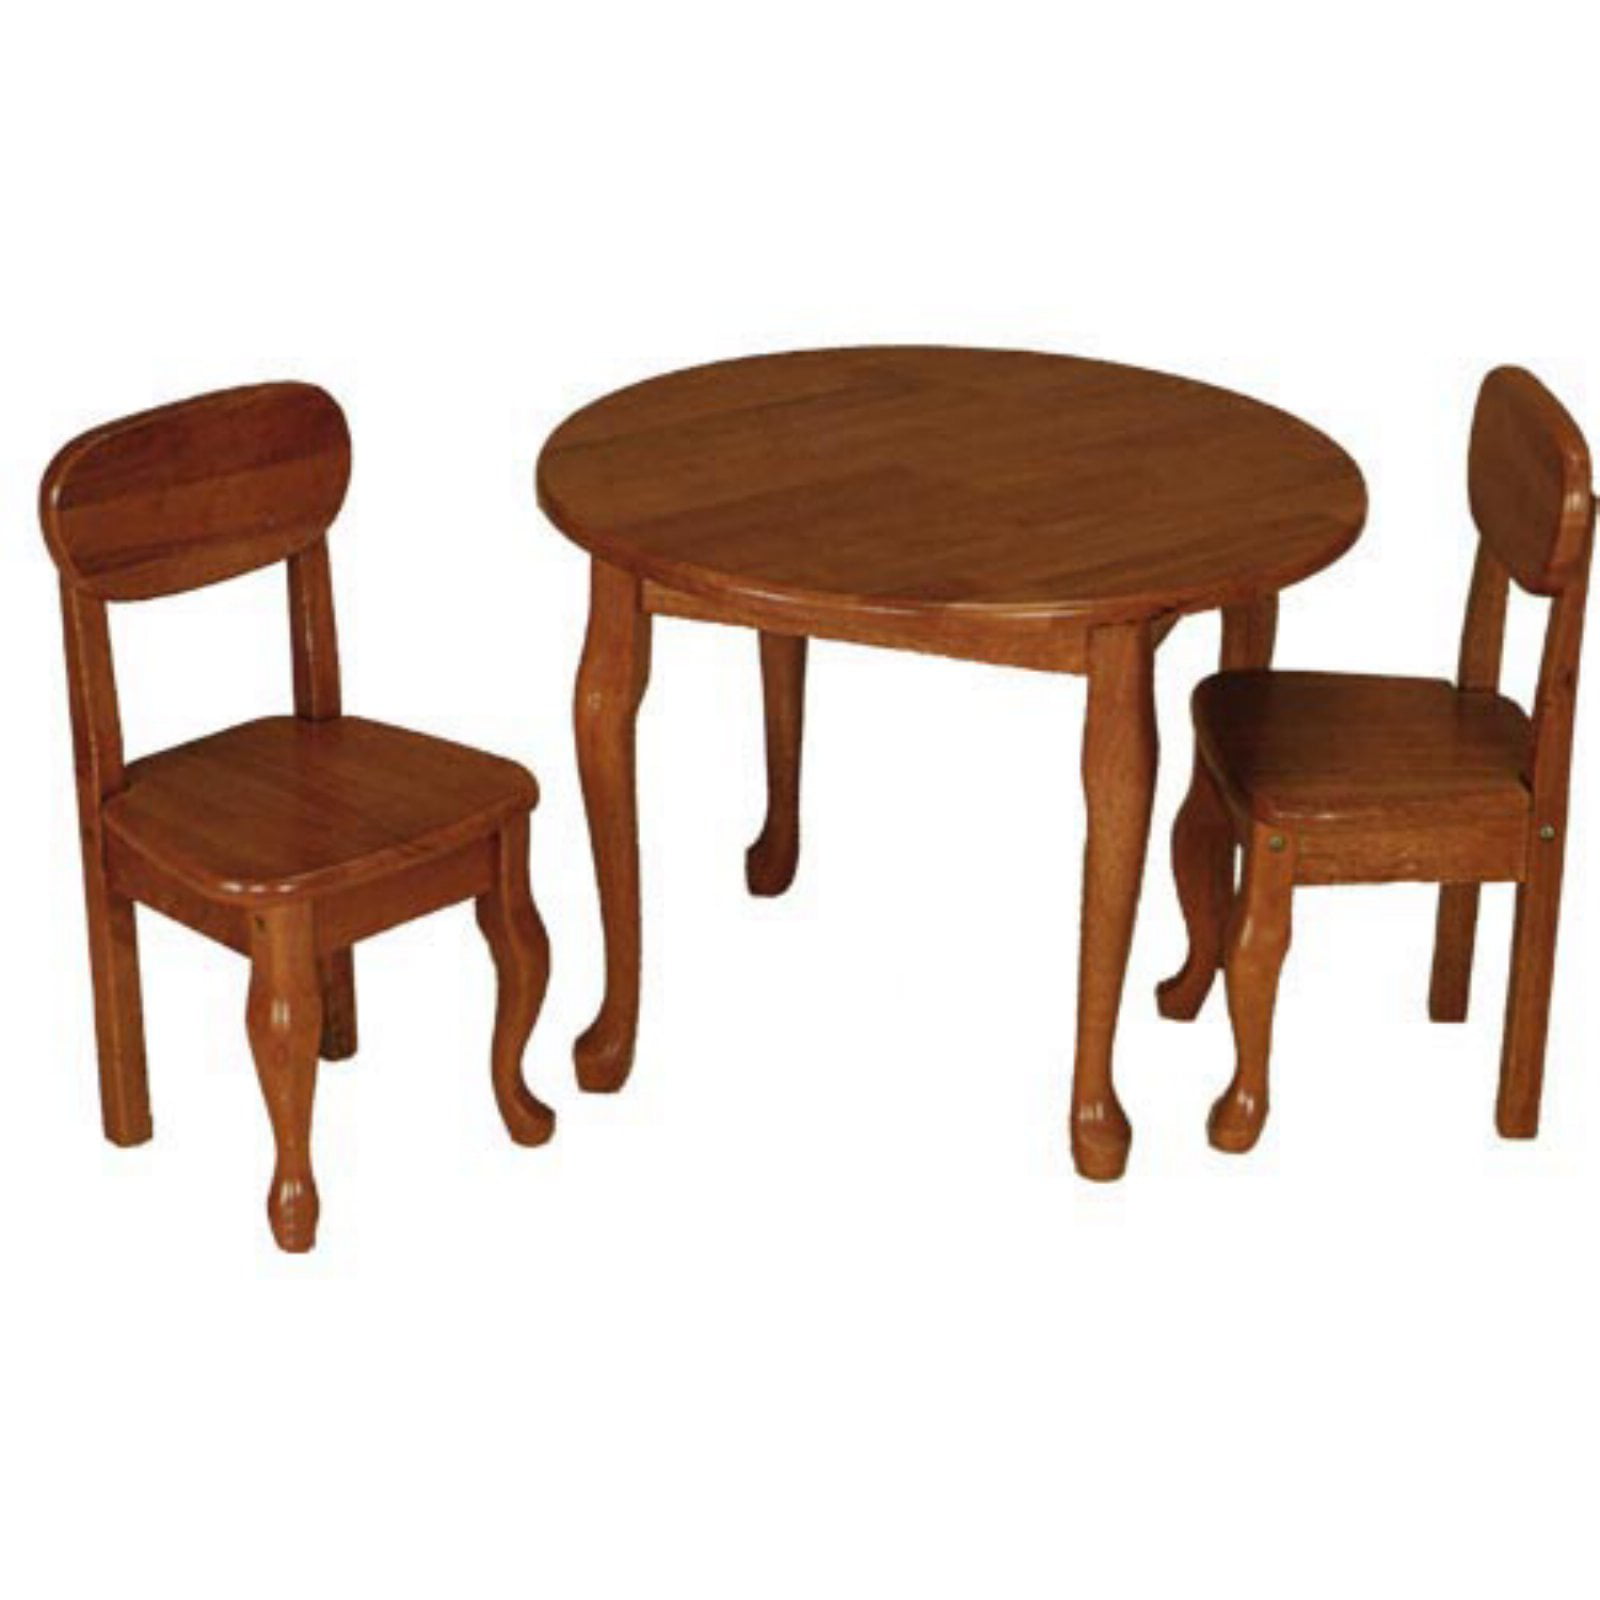 Gift Mark Childrens Cherry Round Table with 2 Matching Upholstered Chairs 13004C 